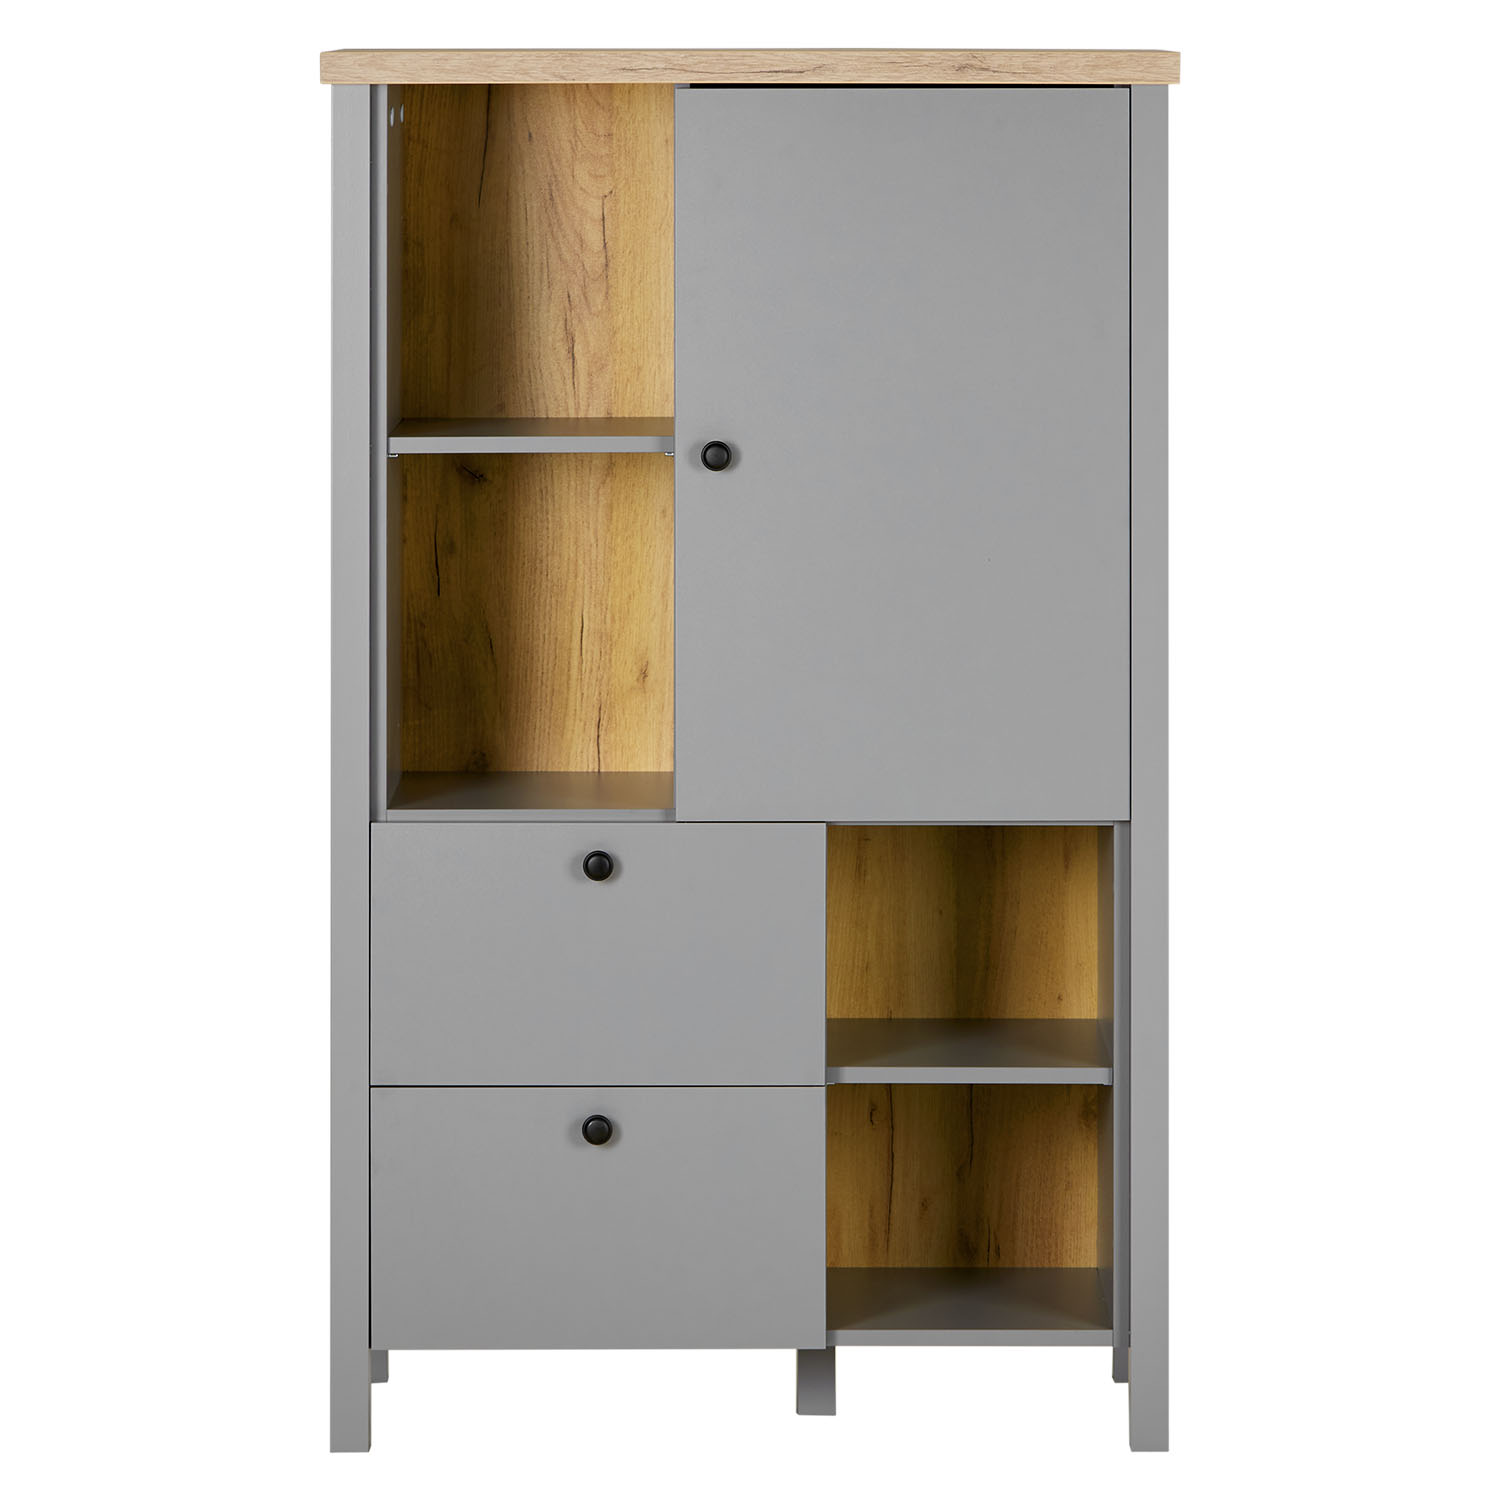 Highboard Sideboard Grey Wood Natural Storage 2 Drawers Cabinet Buffet Credenza Living Room Cupboard